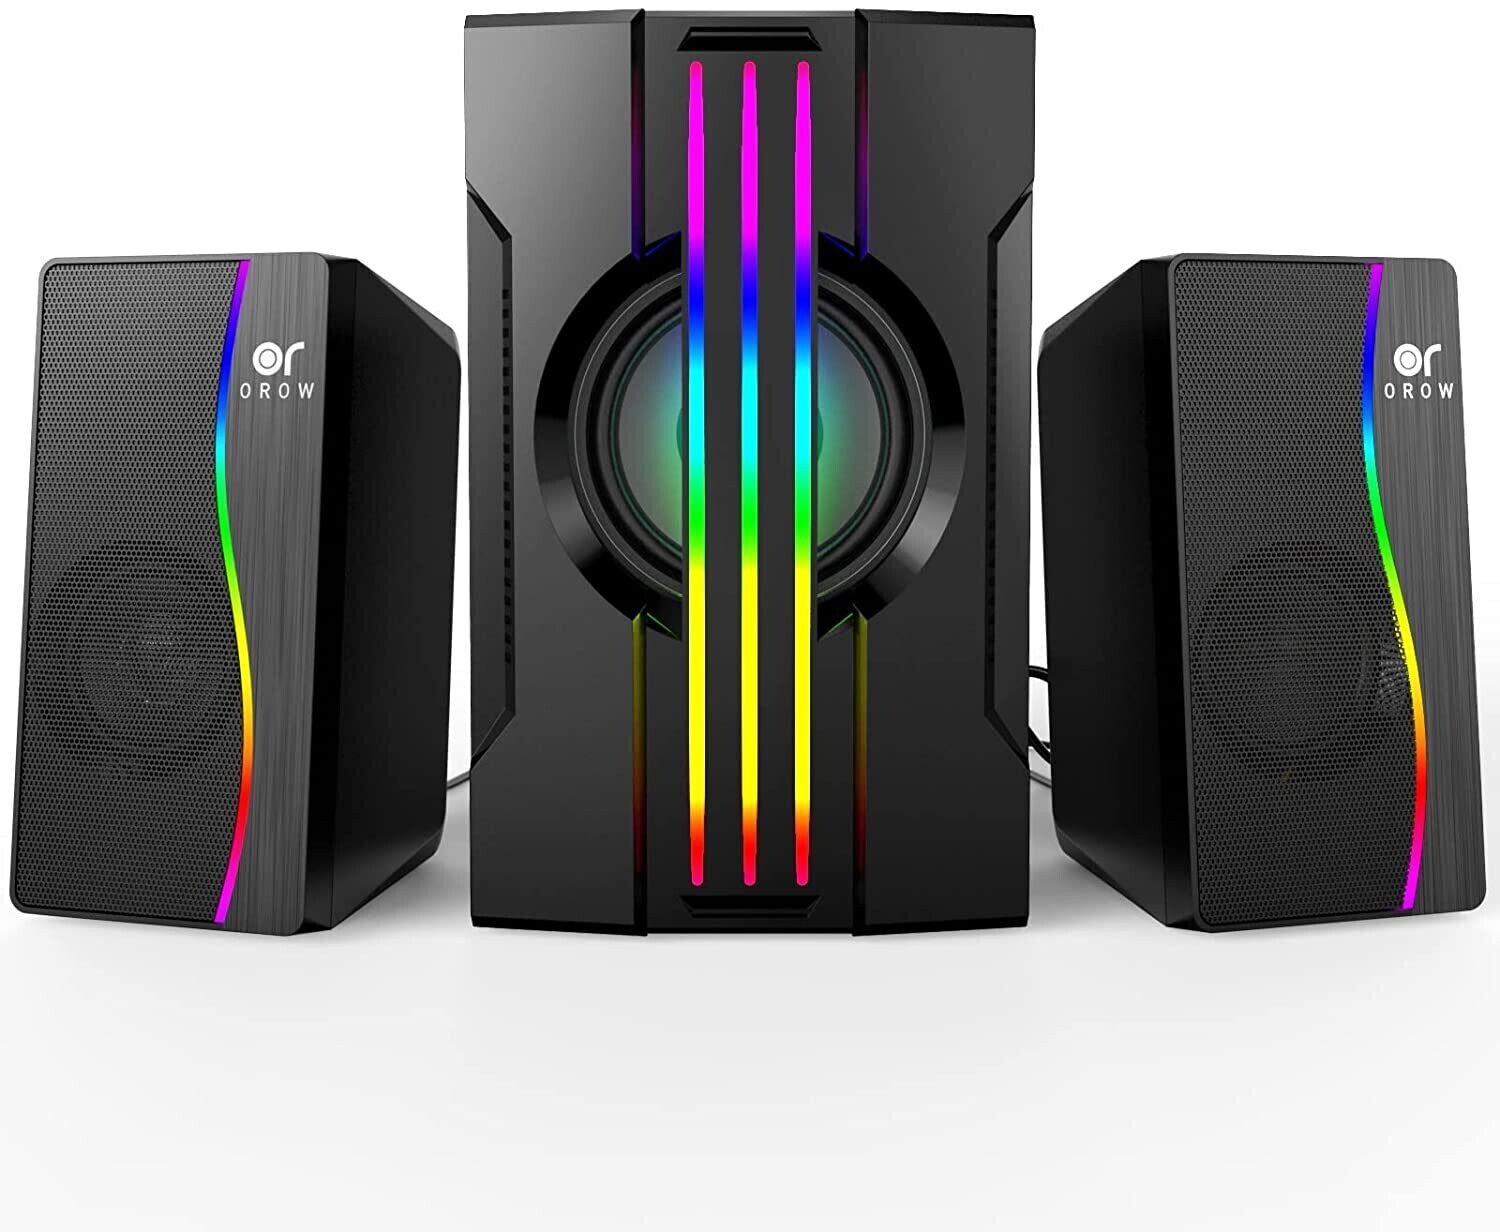 OROW S212 2.1 (7 colors RGB) USB-Powered Desktop Speakers with Subwoofer,16W